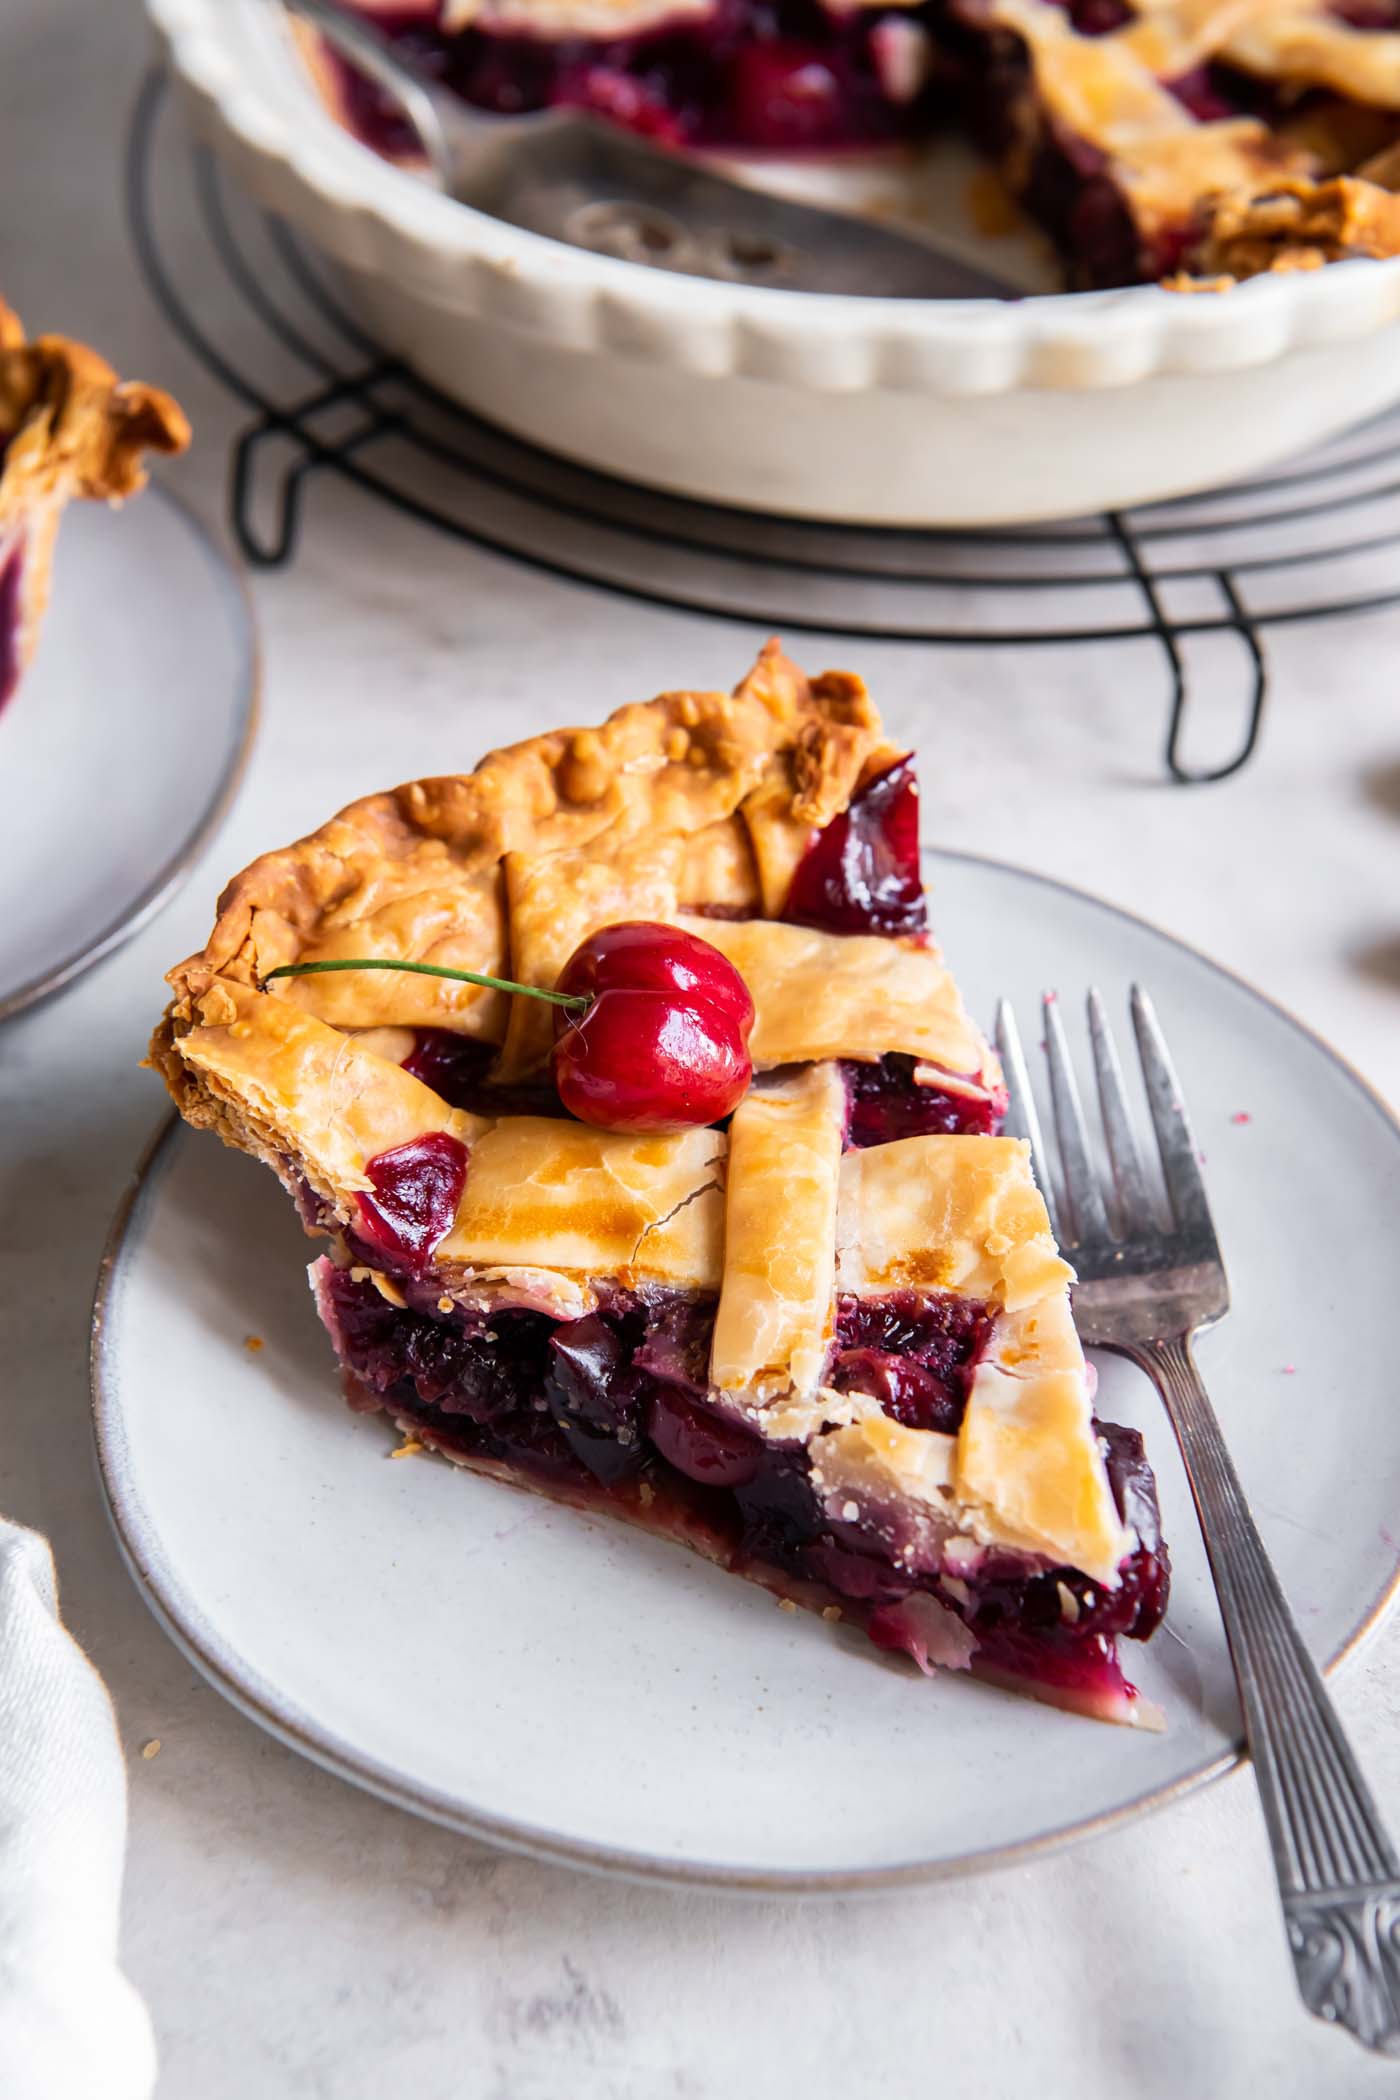 Slice of cherry pie on a small plate with a fork.